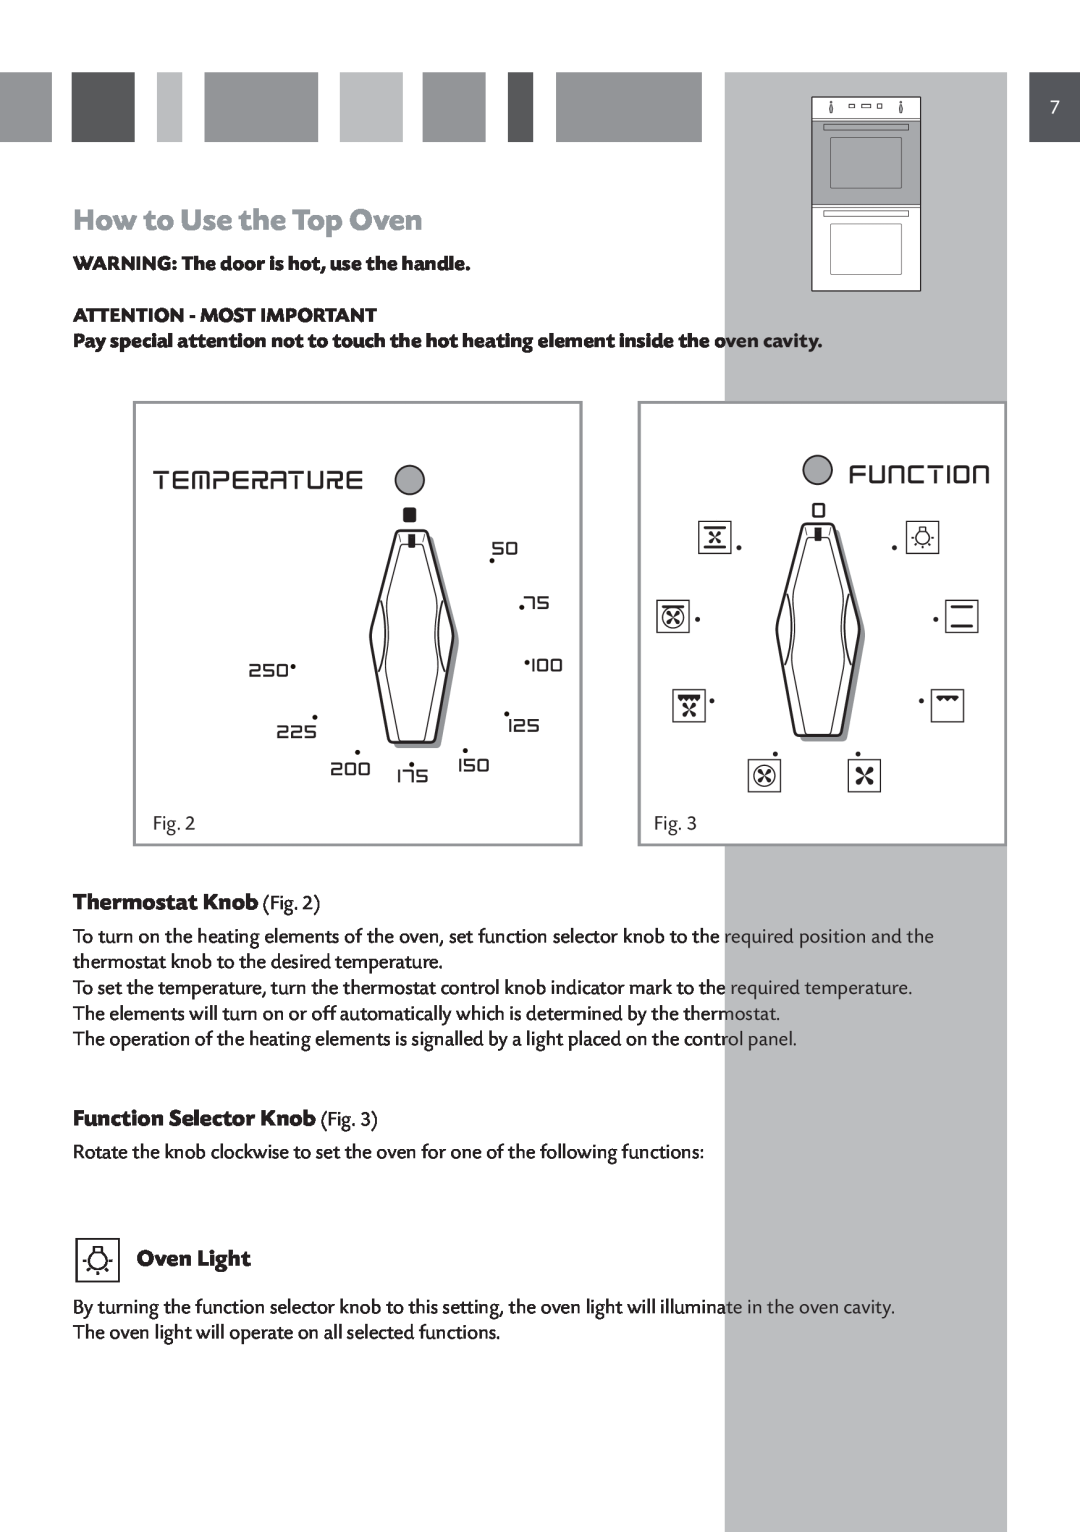 CDA 11Z6 manual How to Use the Top Oven, Thermostat Knob Fig, Function Selector Knob Fig, Oven Light 